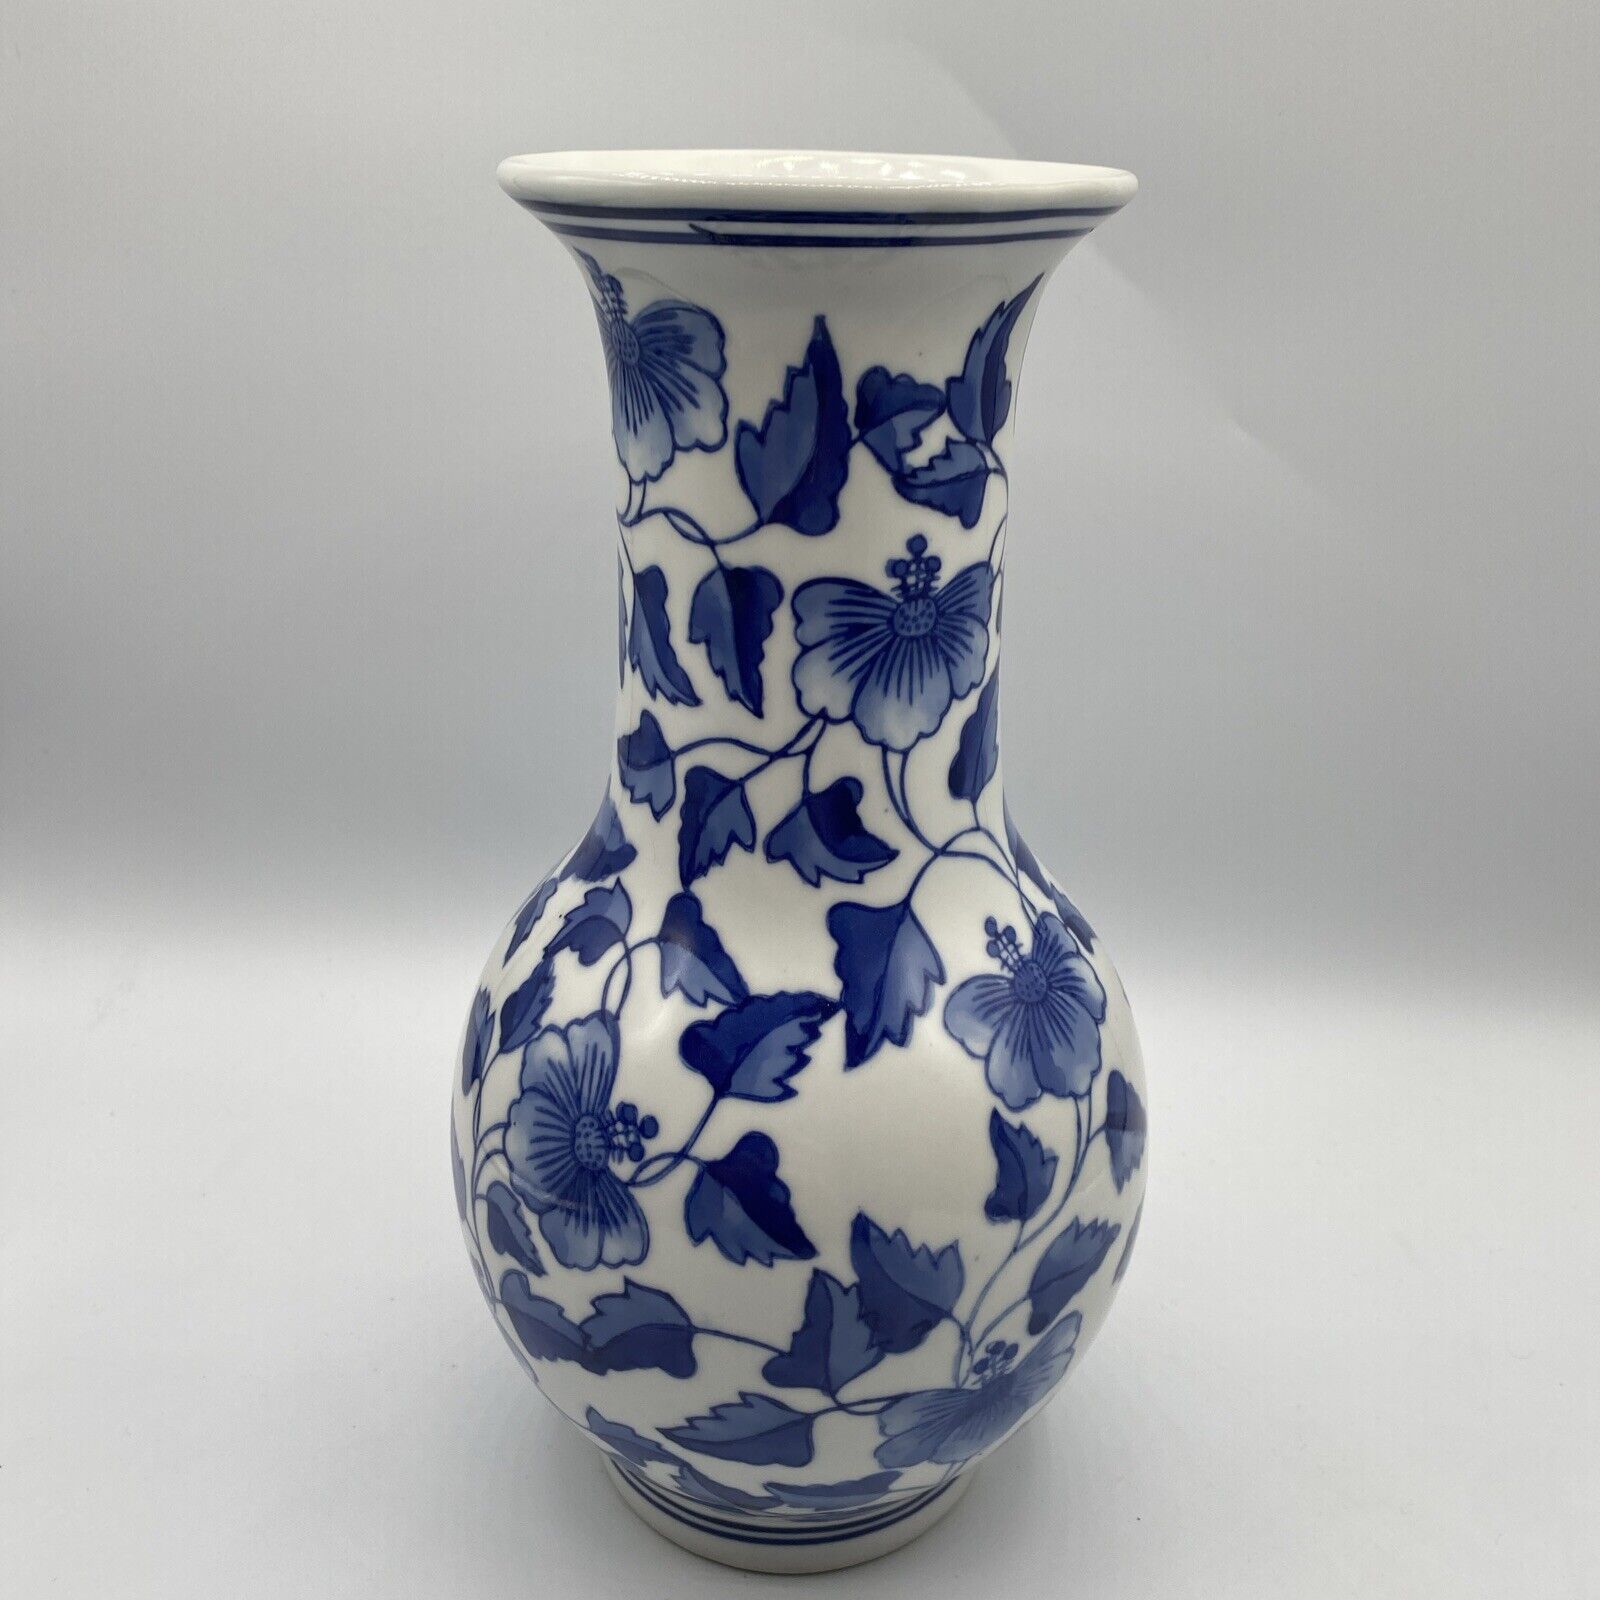 Stunning New Medium Blue and White Asian Style Vase 10 X 5 Inches